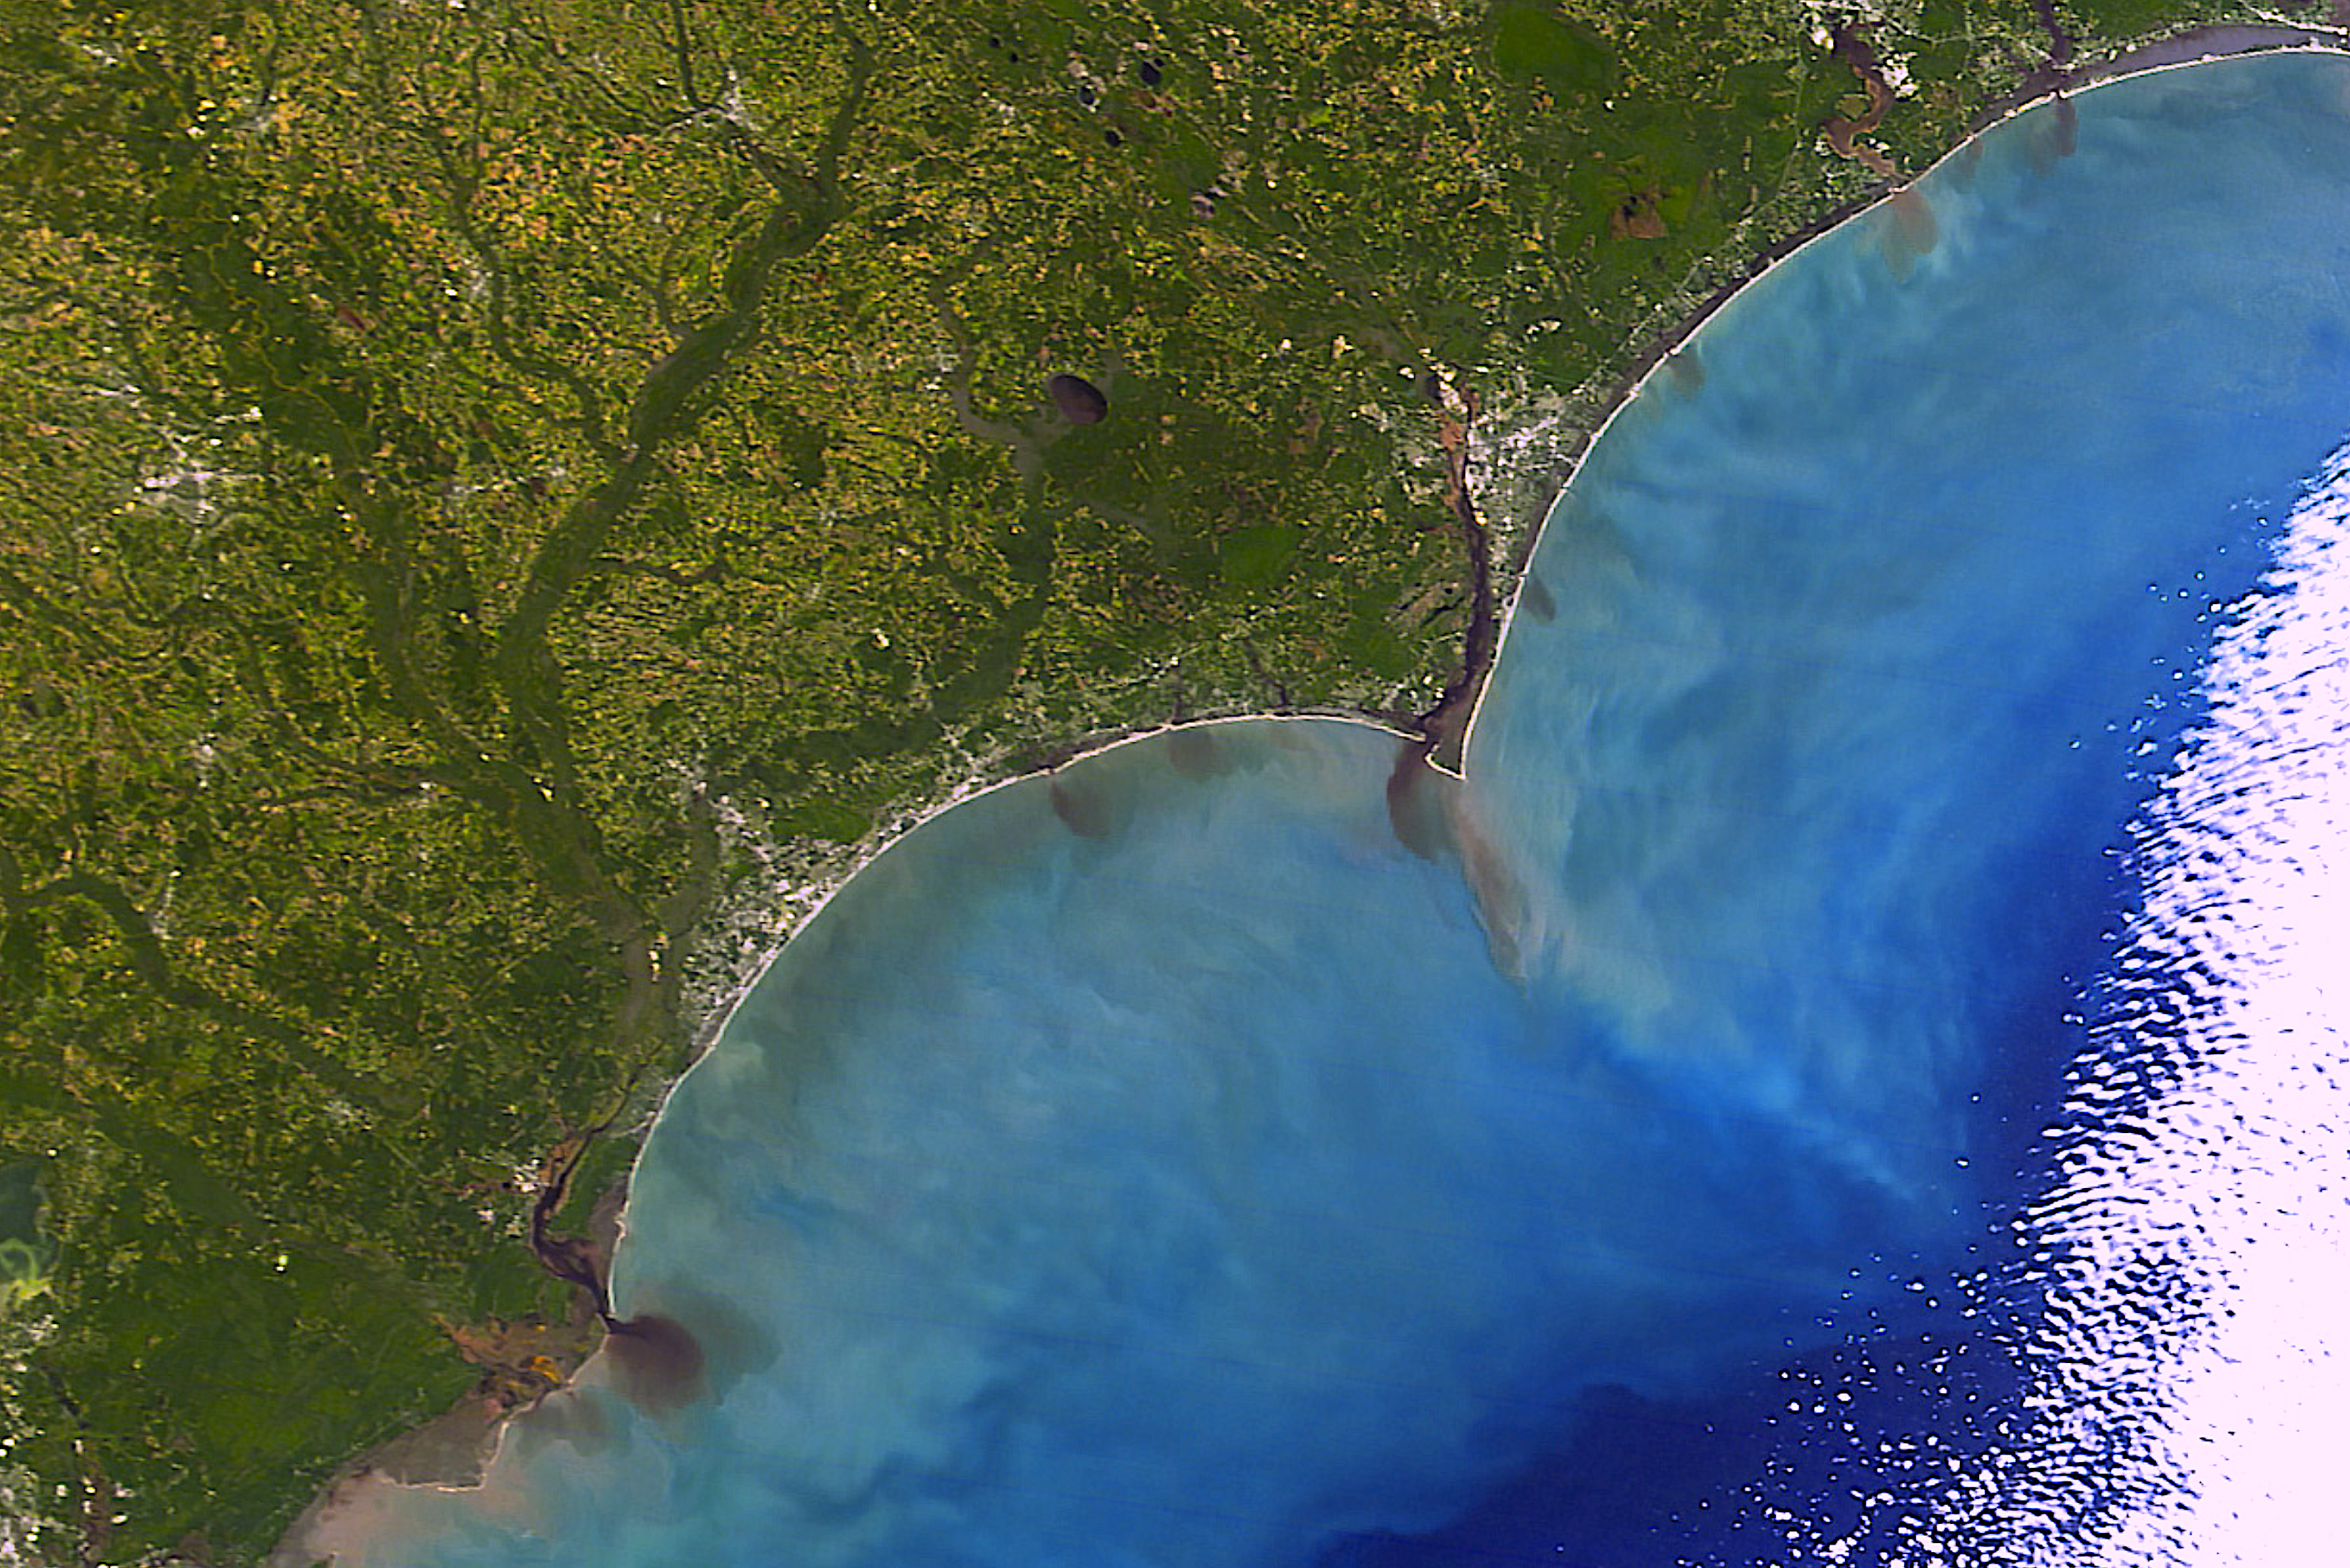 Crop and livestock losses in-state from Matthew were estimated at $400 million. Flooding carried runoff and sediment into tributaries, rivers, and the Atlantic. Credit: NWS Wilmington (flooded field) and NASA (satellite view).